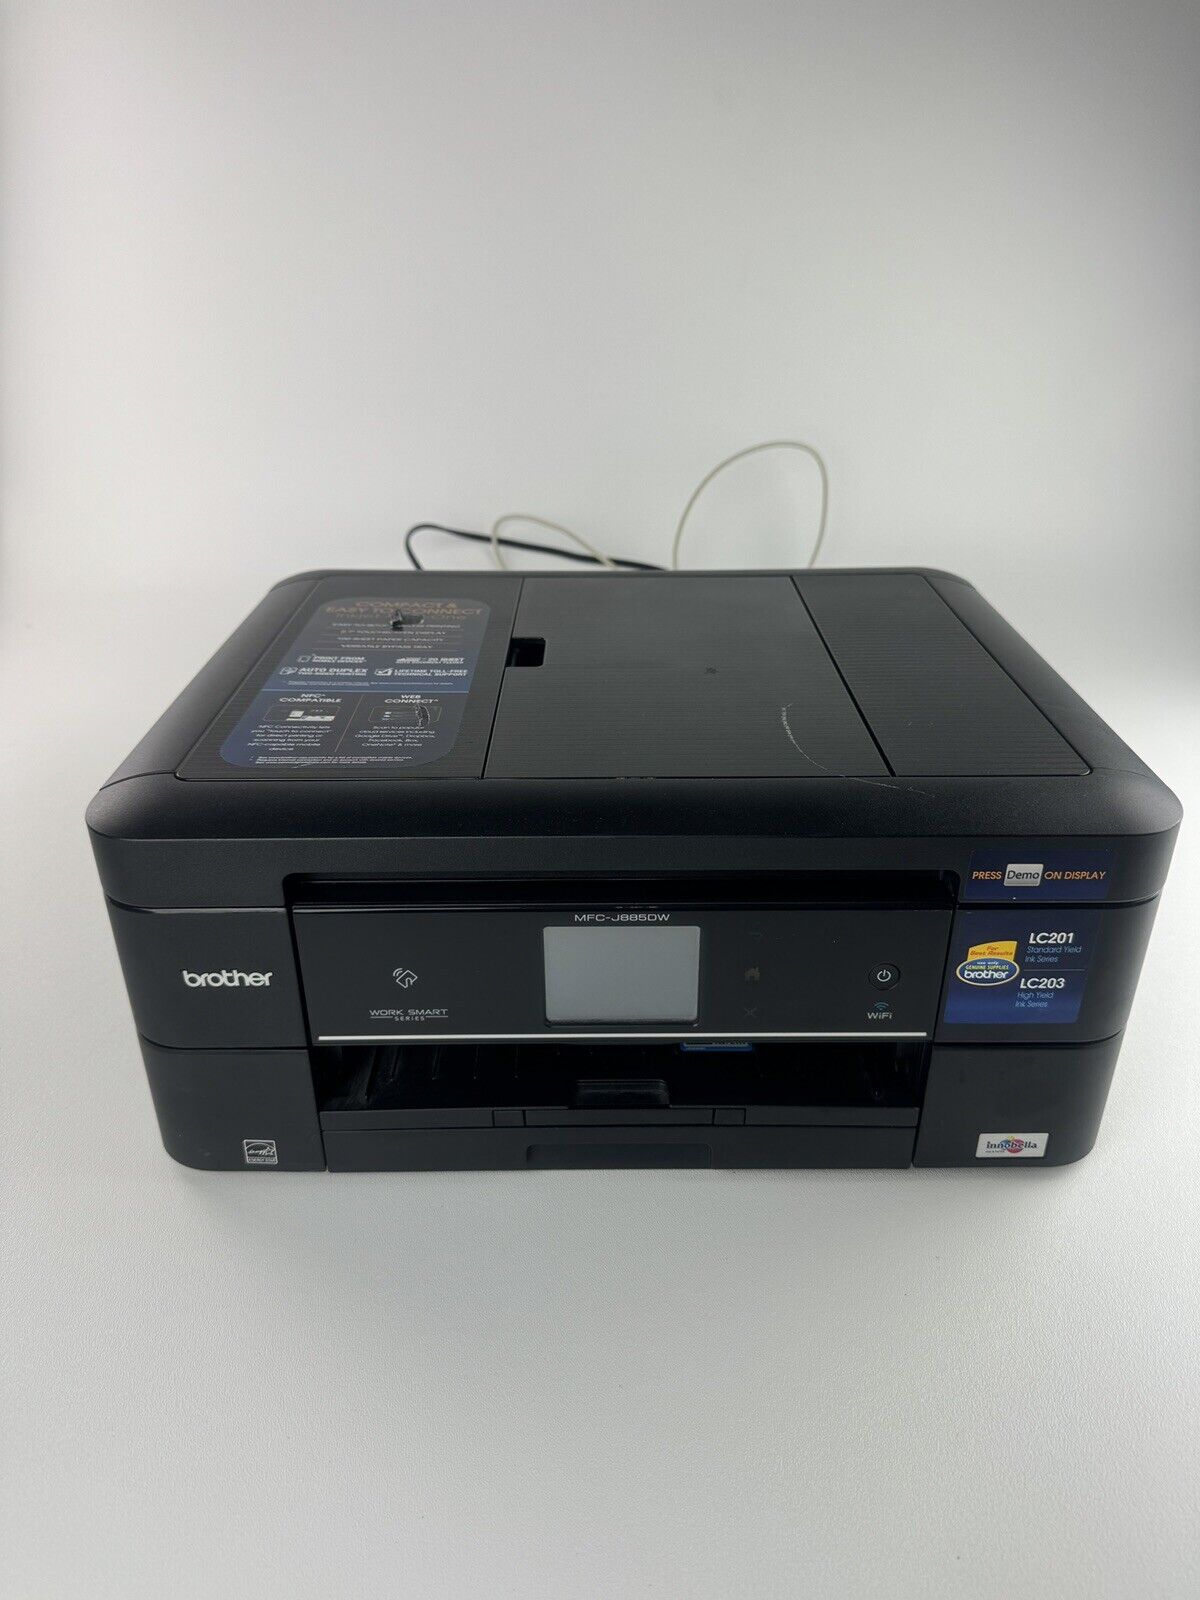 Brother MFC-J885DW Work Smart Inkjet All in One - Powers On sold AS-IS